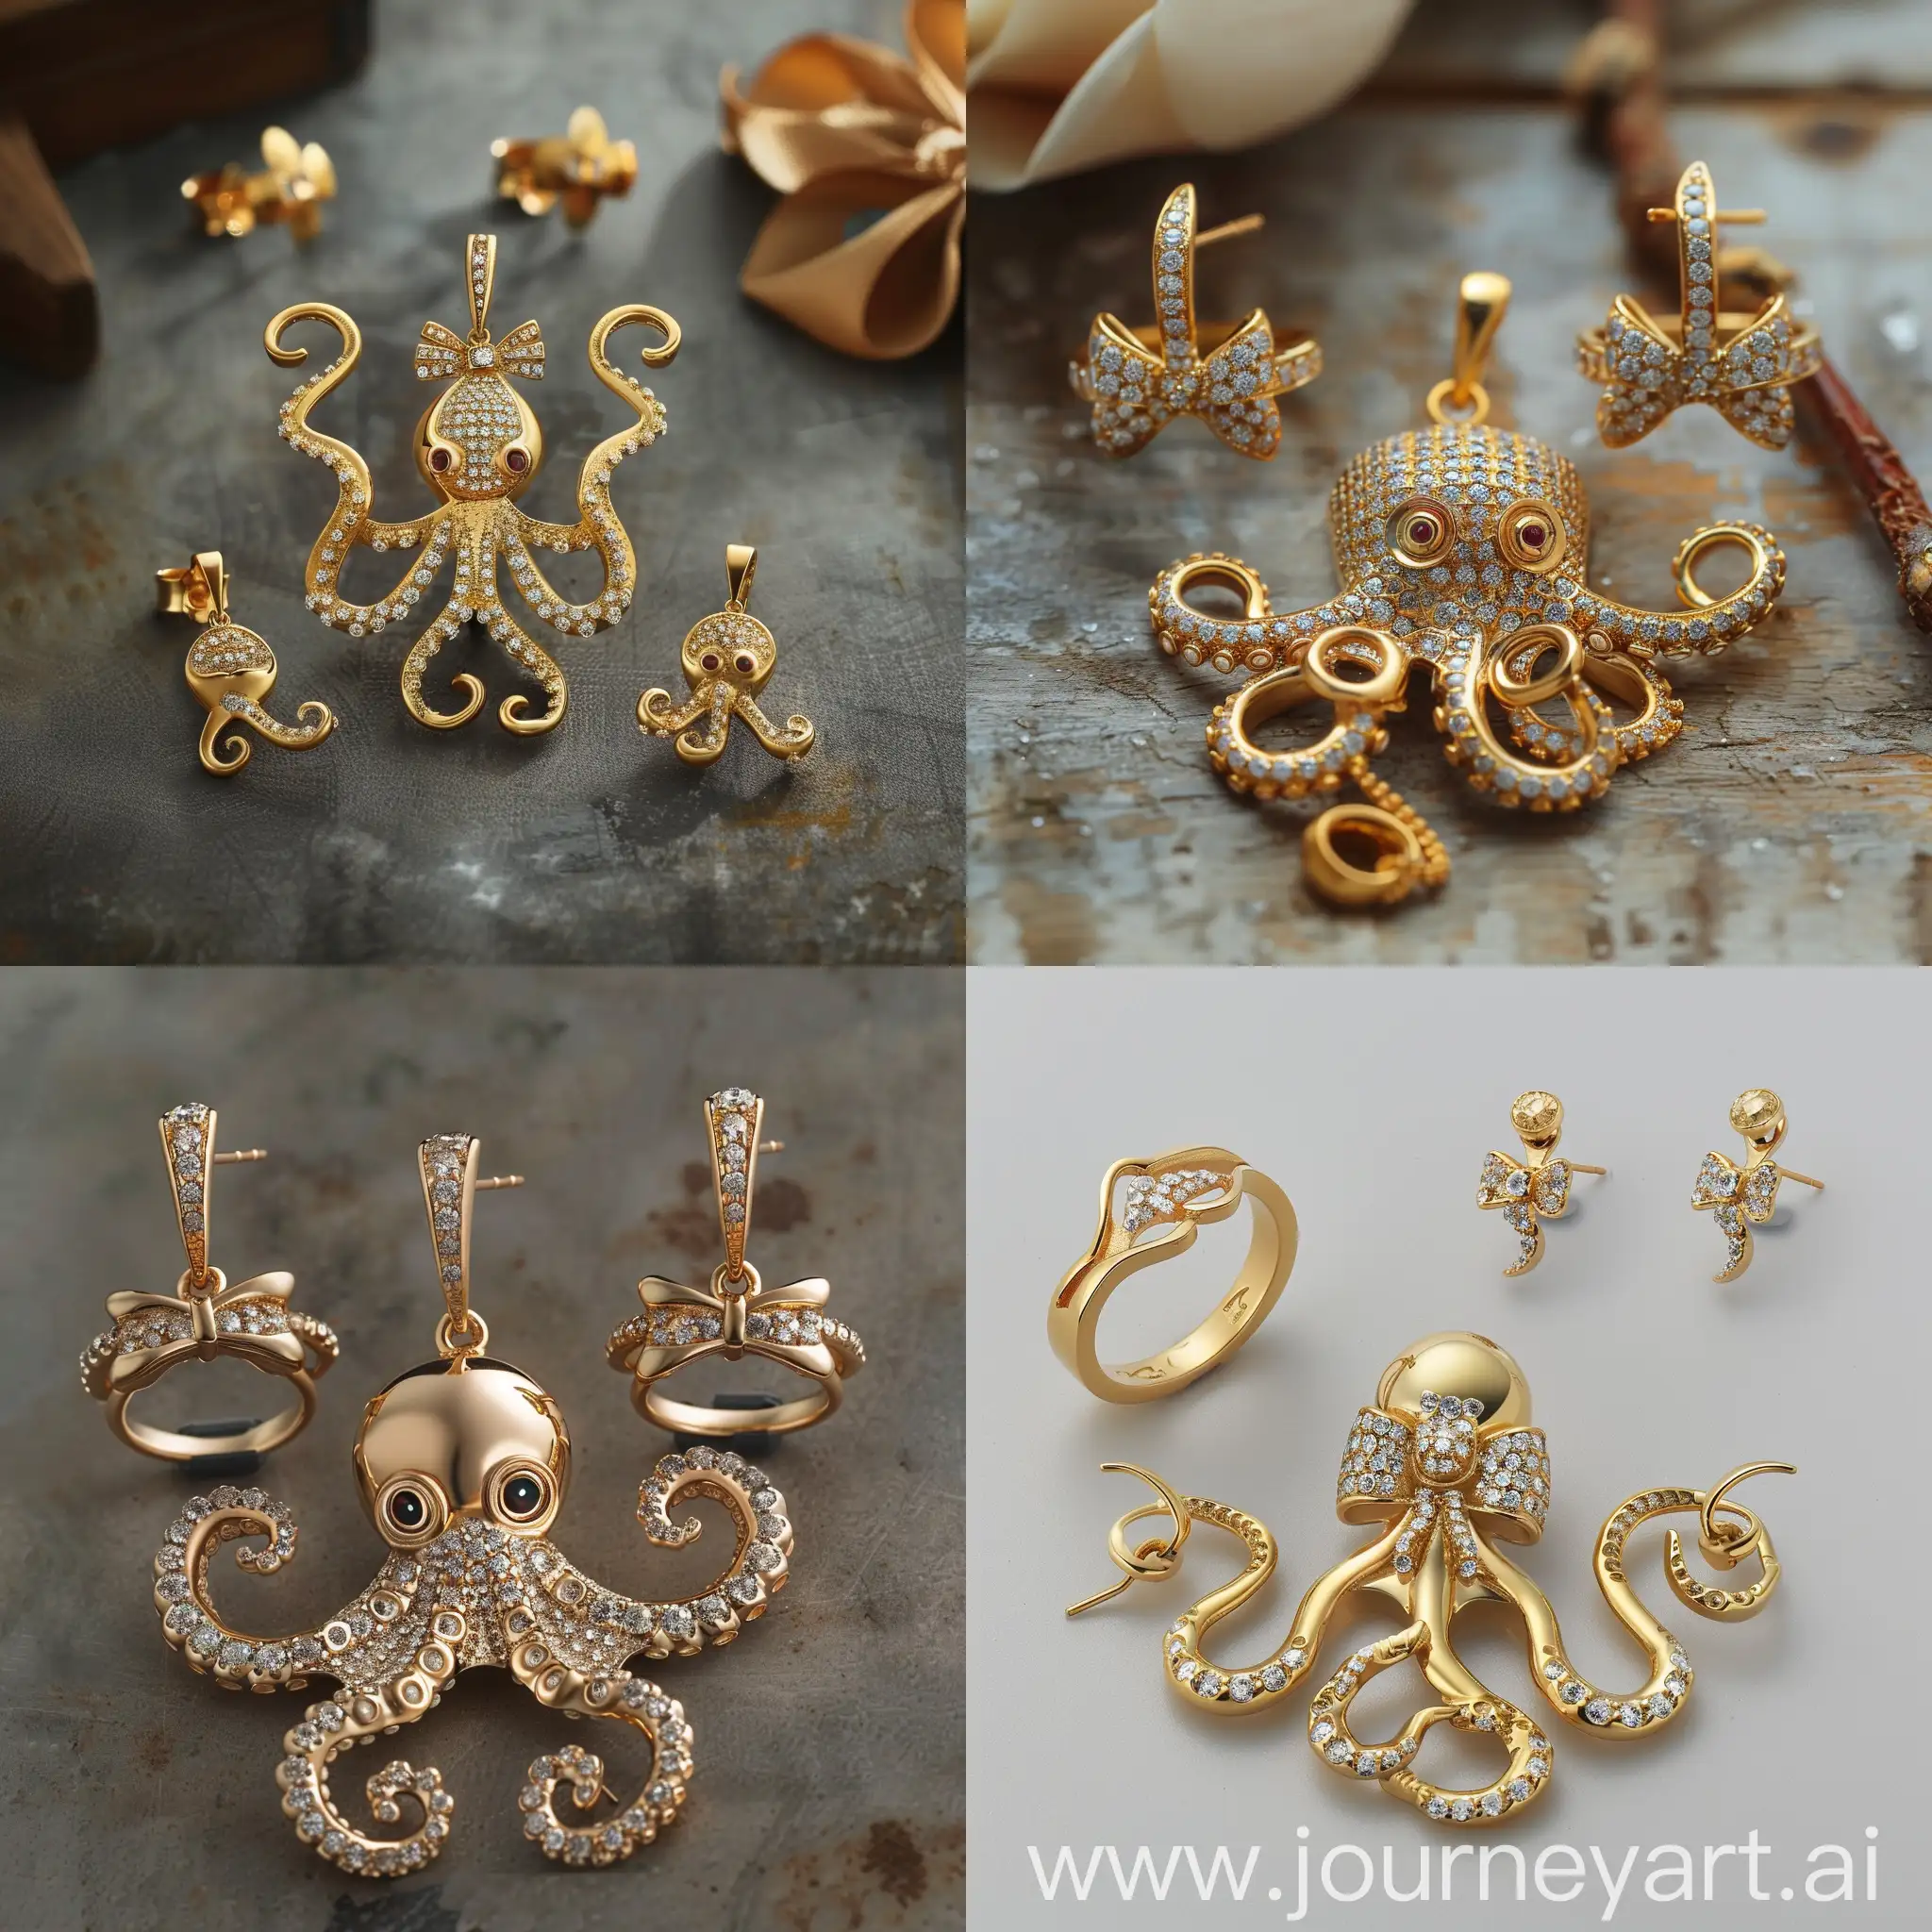 A set of gold pendants, rings and earrings, all three in the shape of an octopus with jewels on its arms and a bow on its head with very fancy eyes.